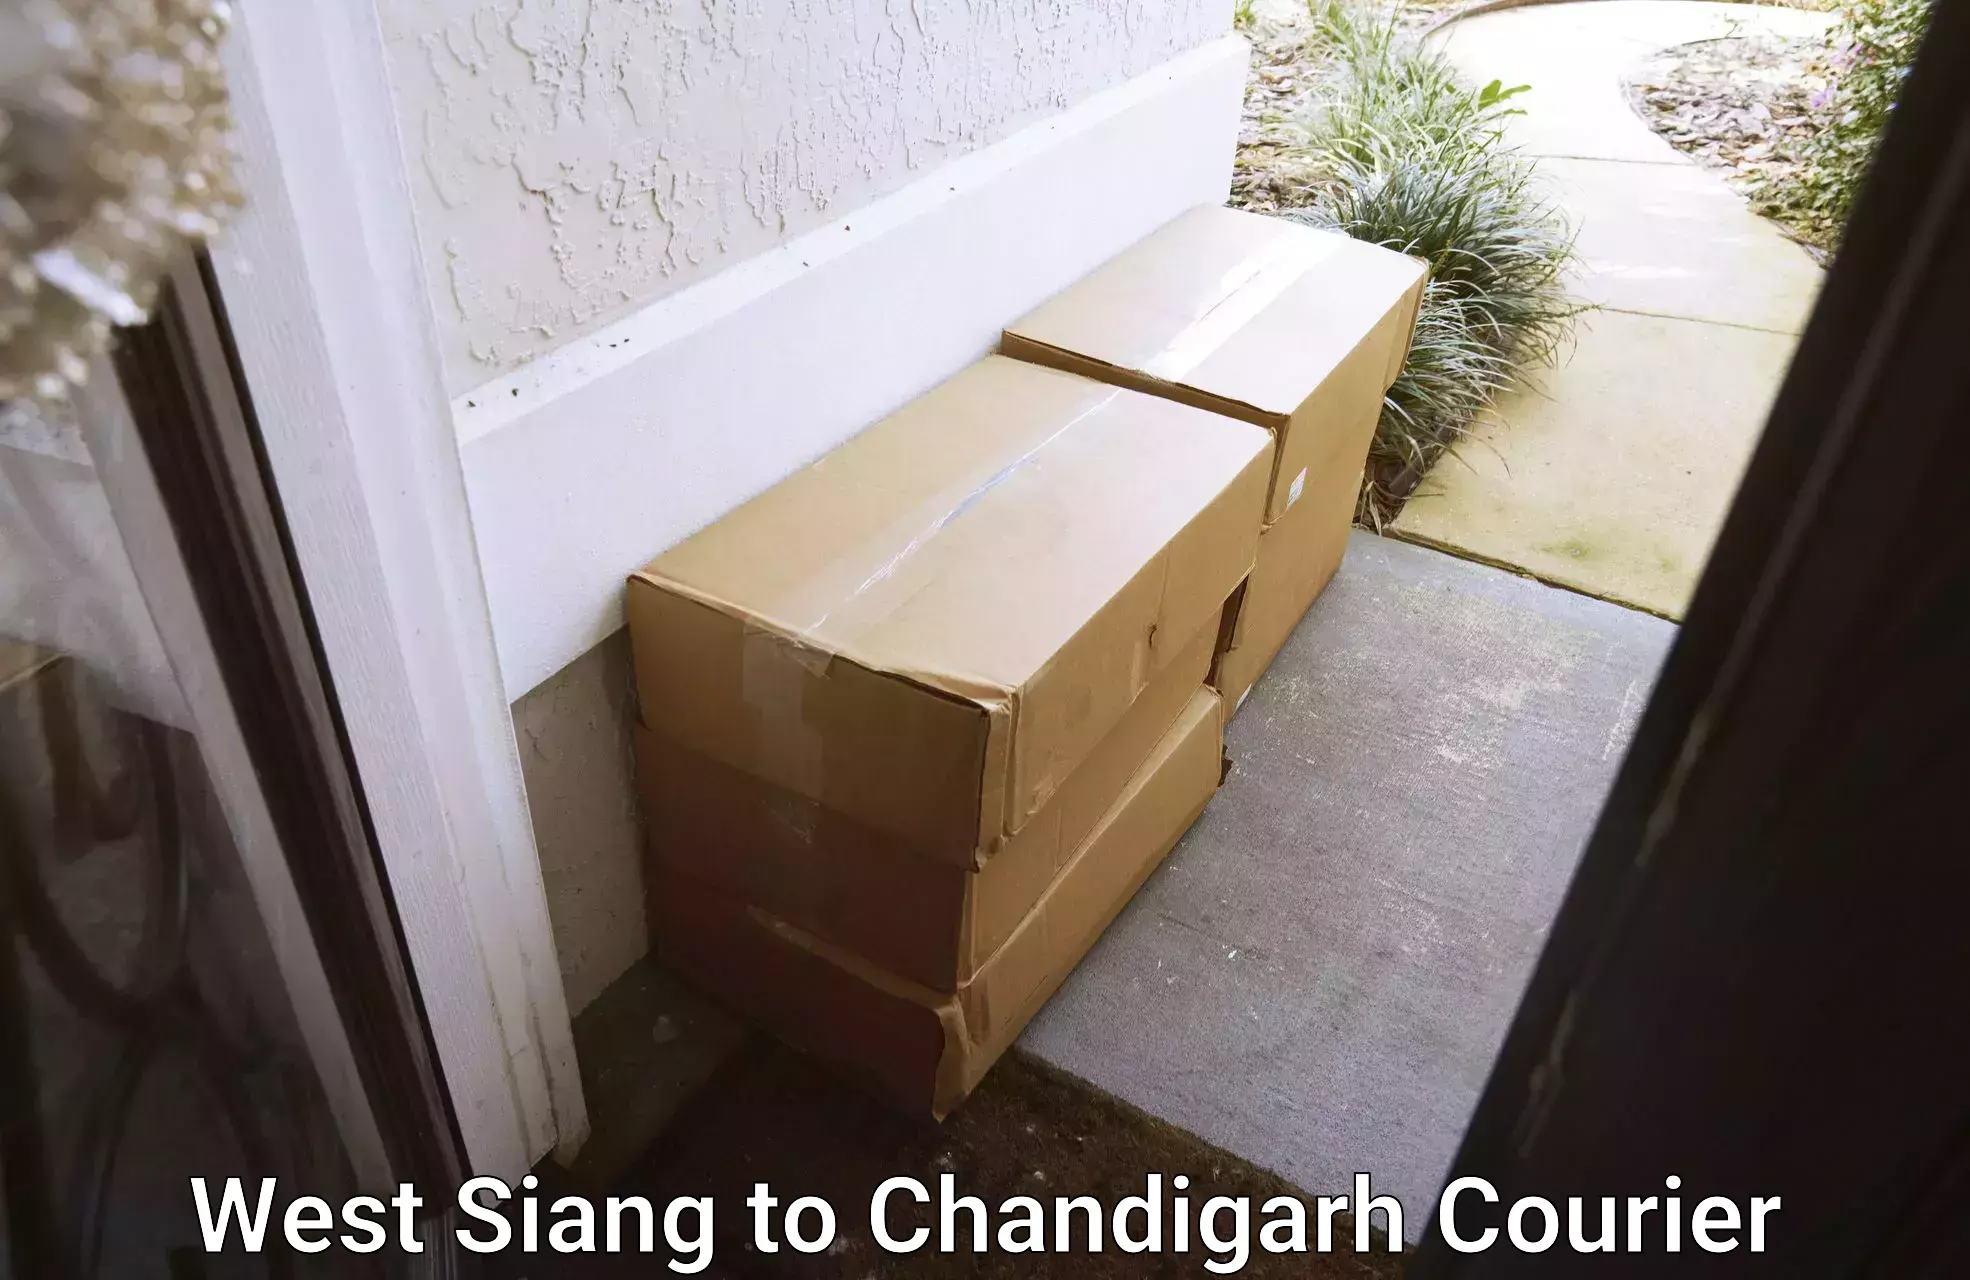 Sustainable courier practices West Siang to Chandigarh